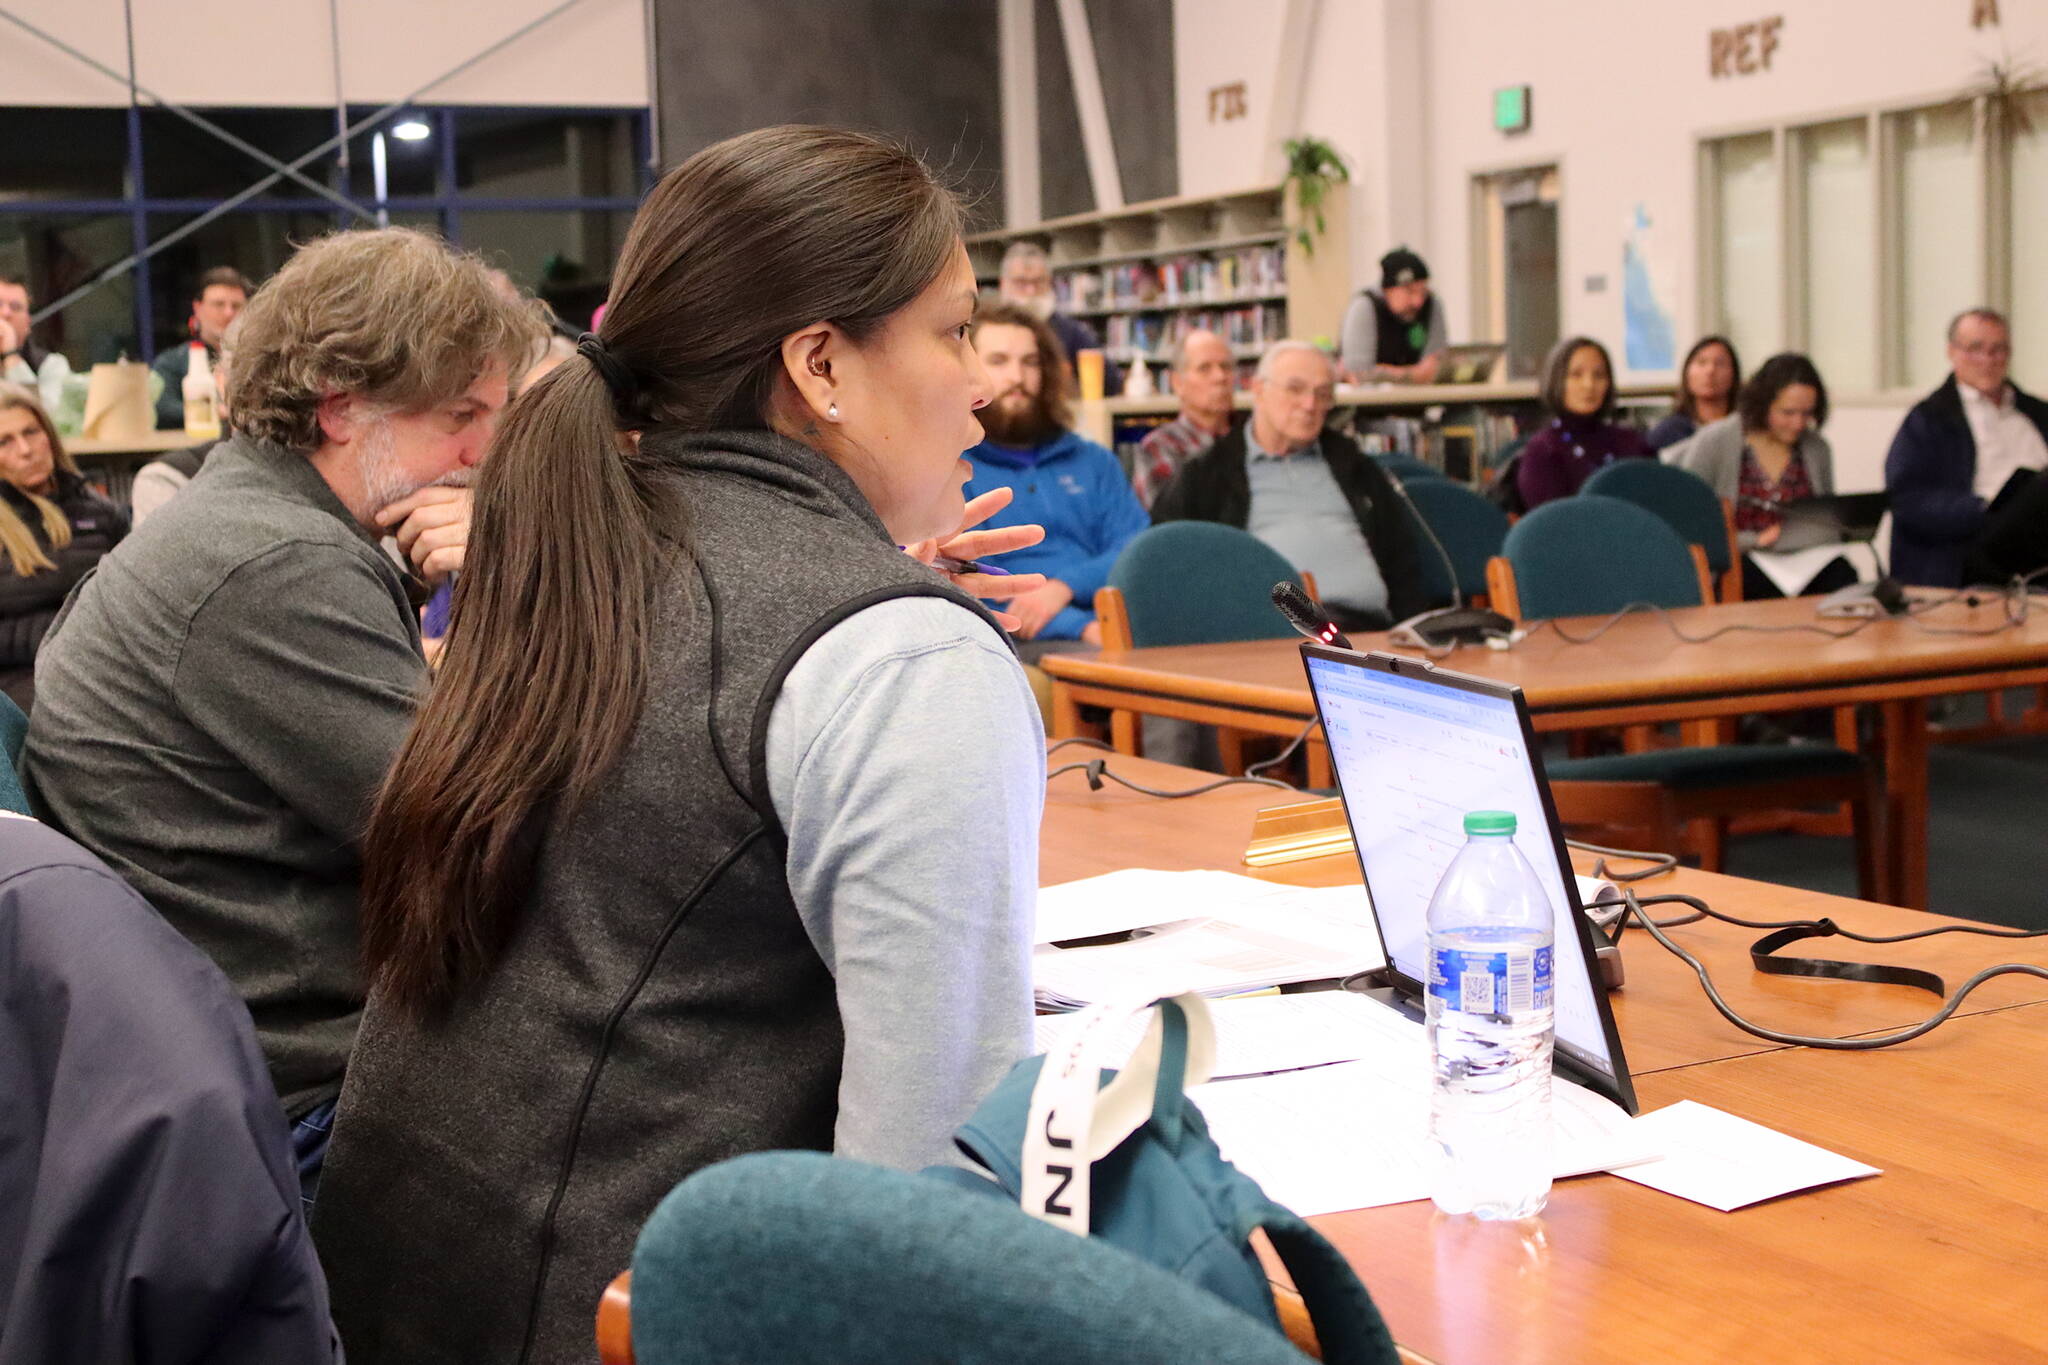 Amber Frommherz, a member of the Juneau Board of Education, expresses concerns about next year’s proposed budget during a special meeting Thursday night at Thunder Mountain High School. (Mark Sabbatini / Juneau Empire)